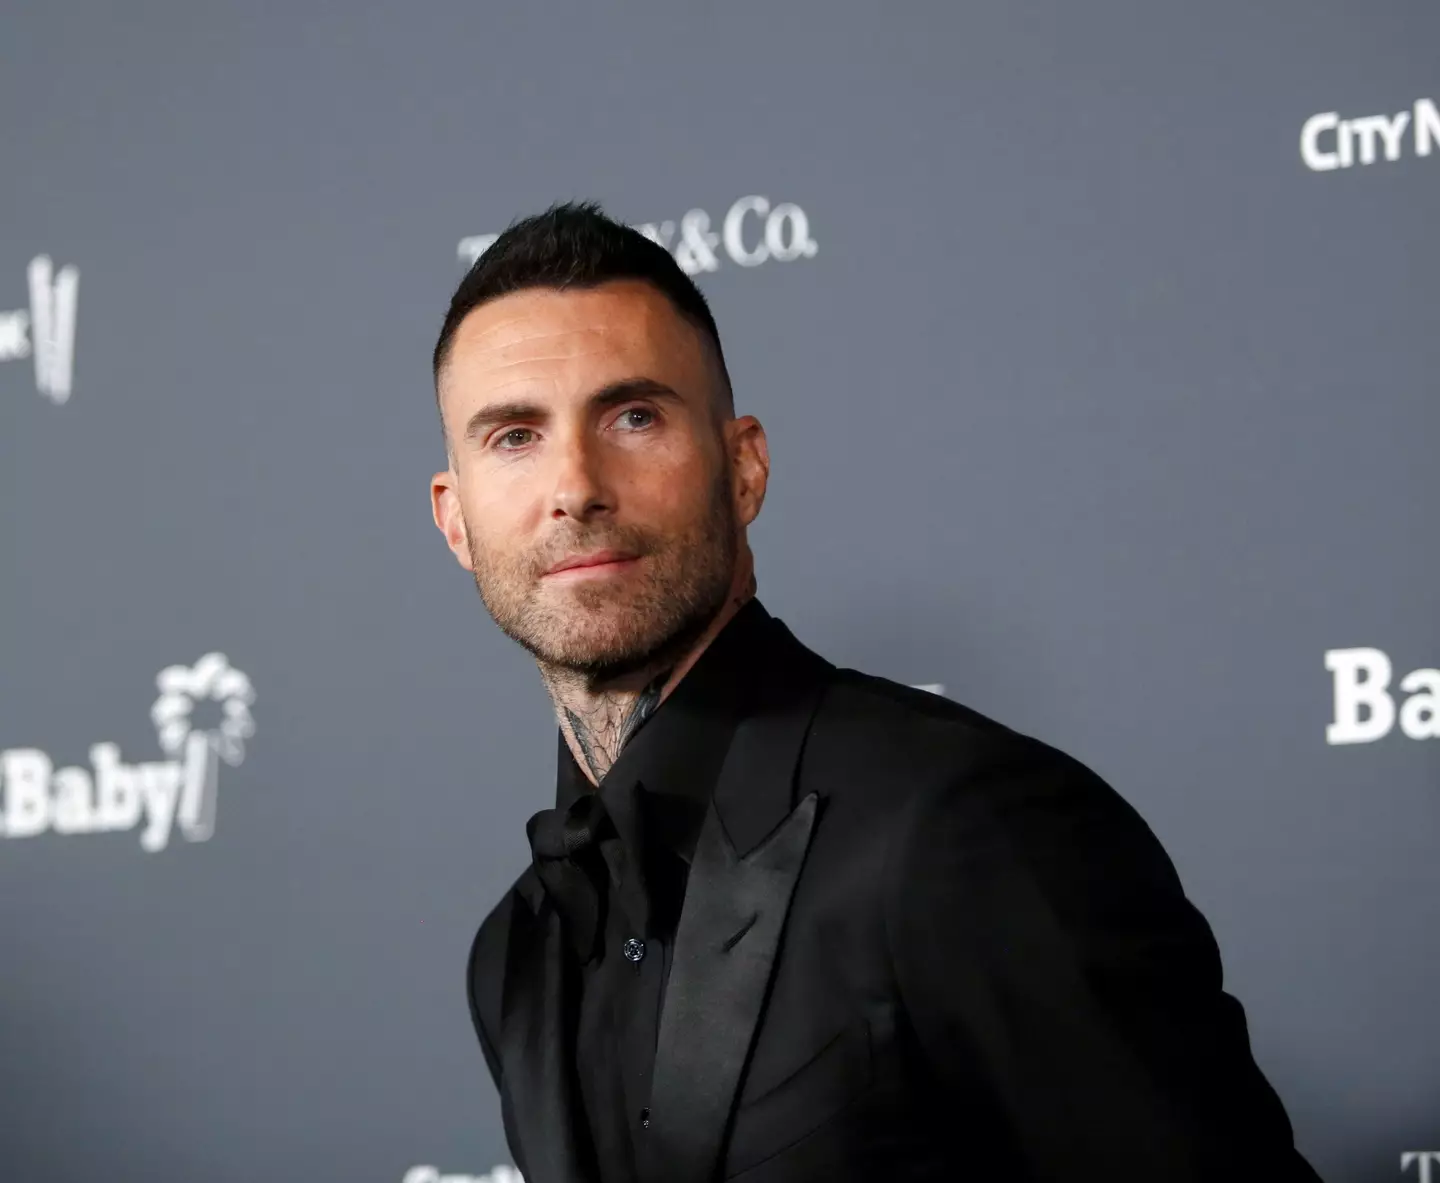 Levine swapped two Ferraris for the Maserati.